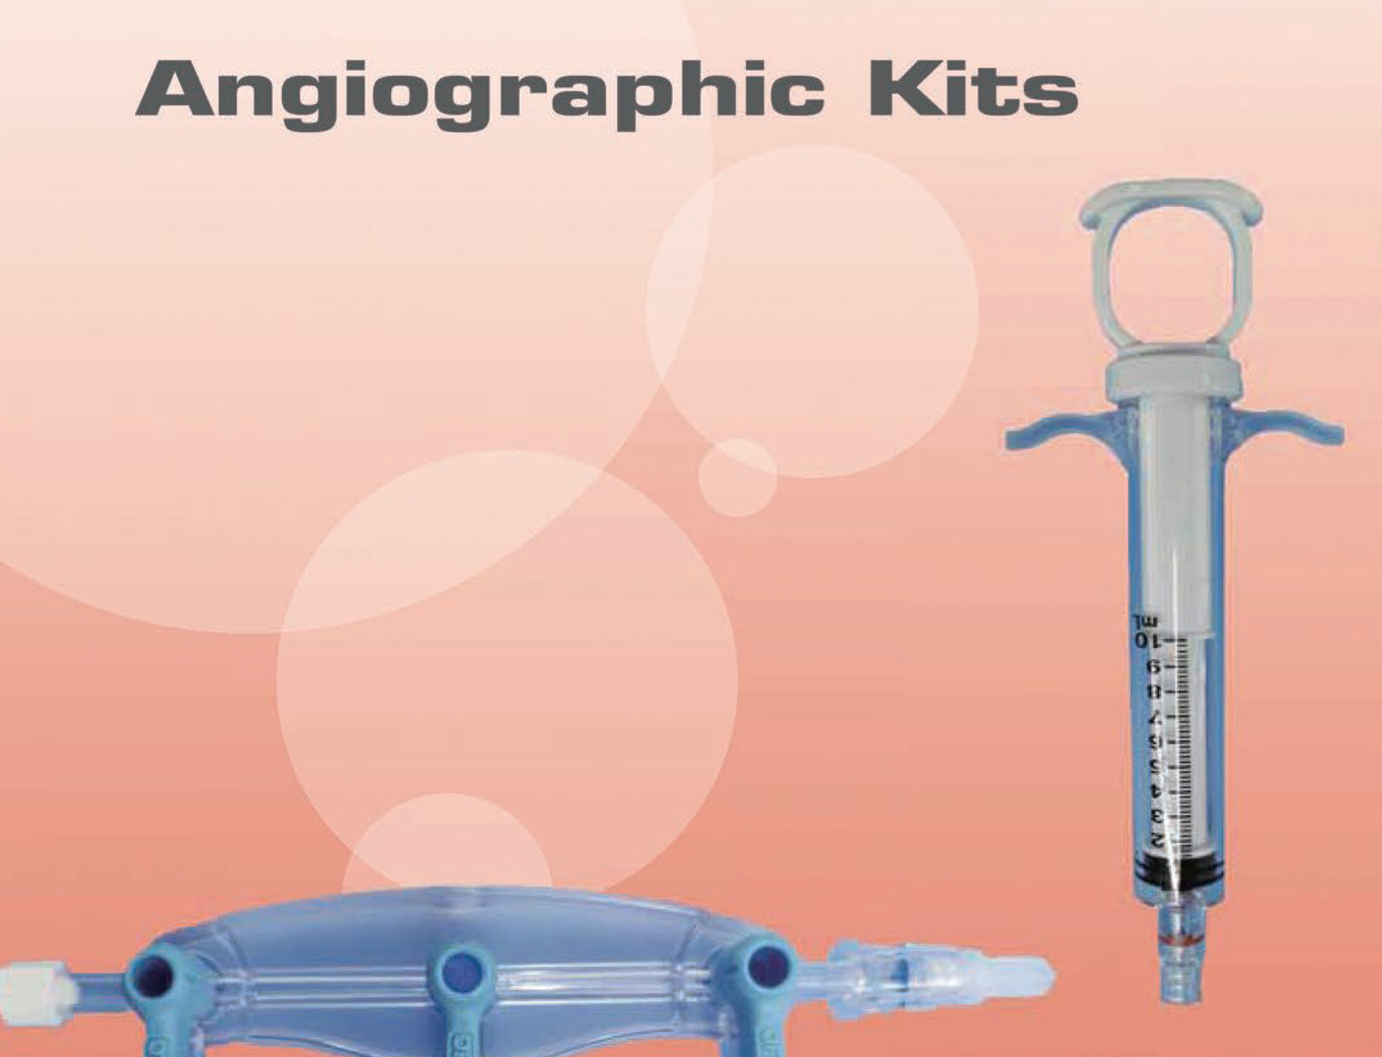 <p><span style="font-weight: bold;">Angiographic Kits</span><br></p>